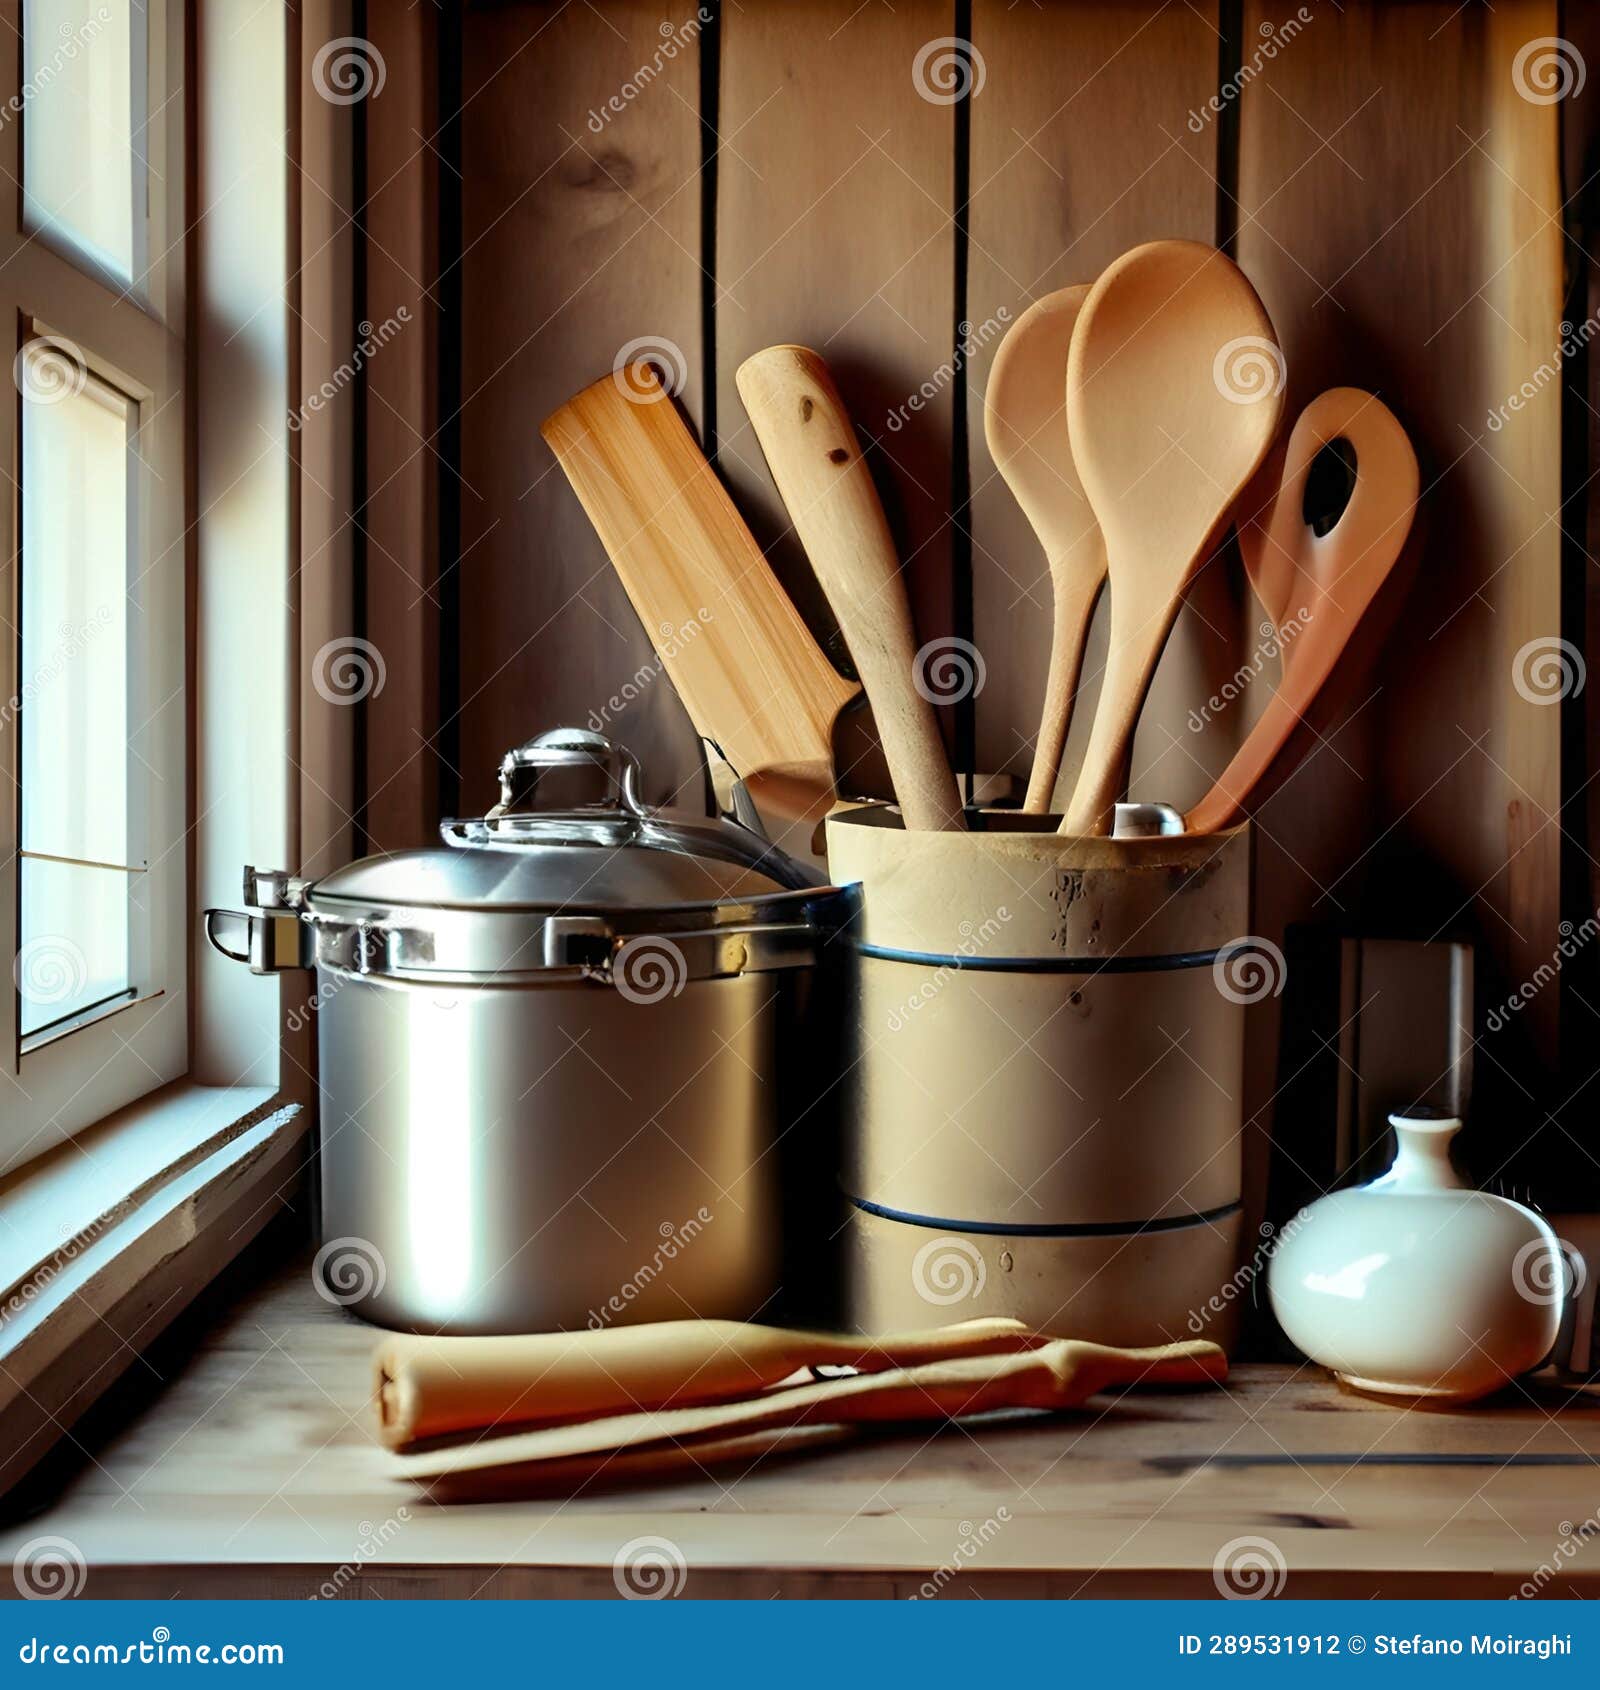 wooden kitchen tools in rurale house